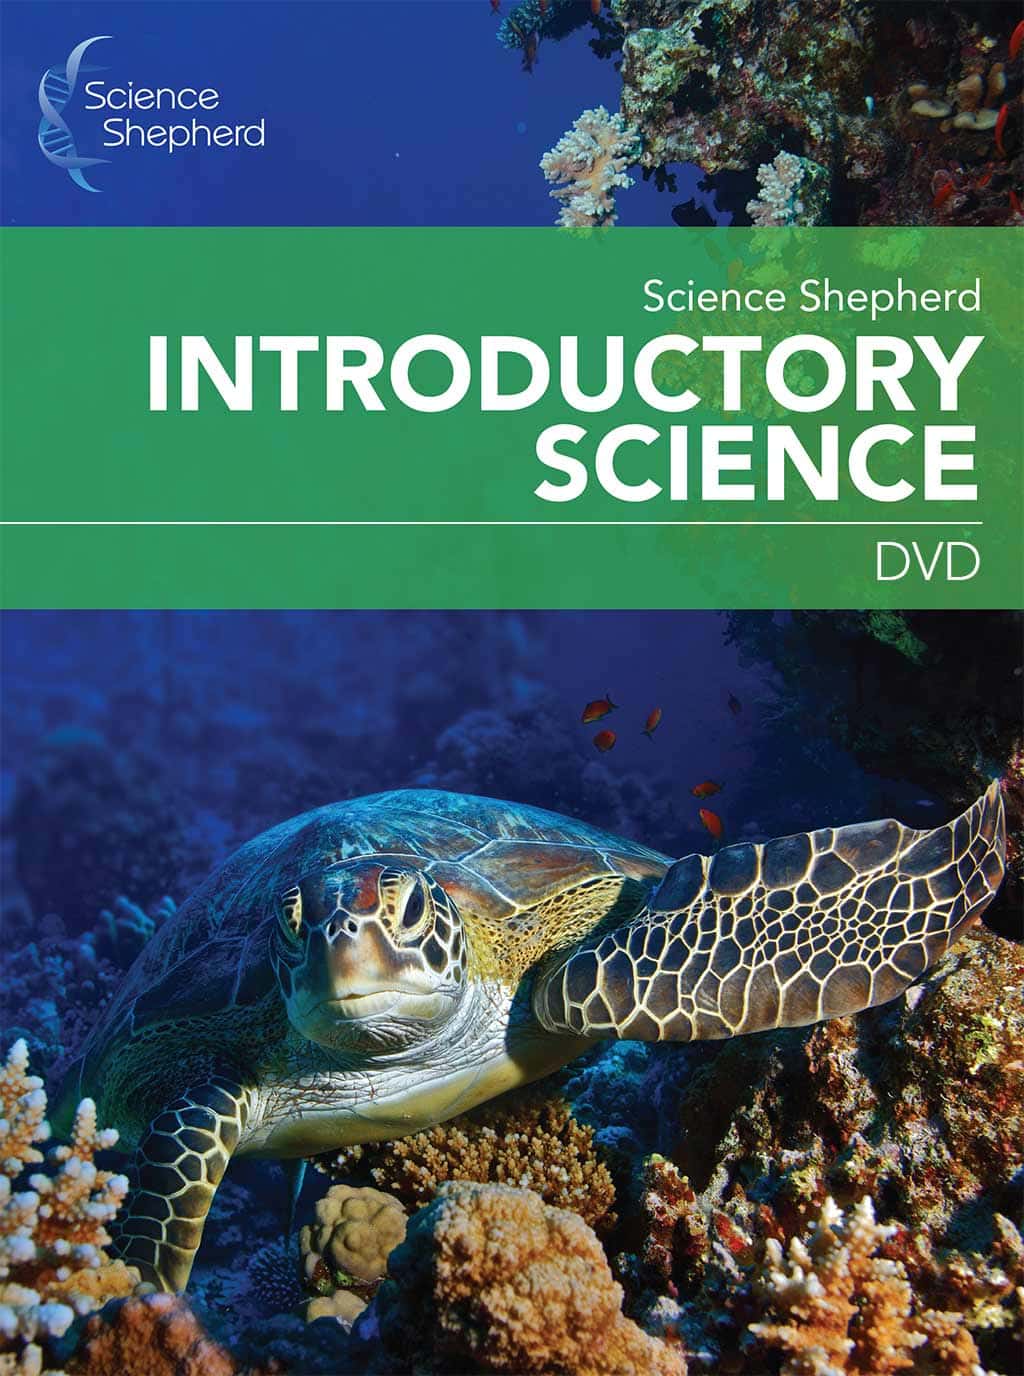 Science Shepherd 1st to 5th grade science curriculum homeschool video course DVD set cover